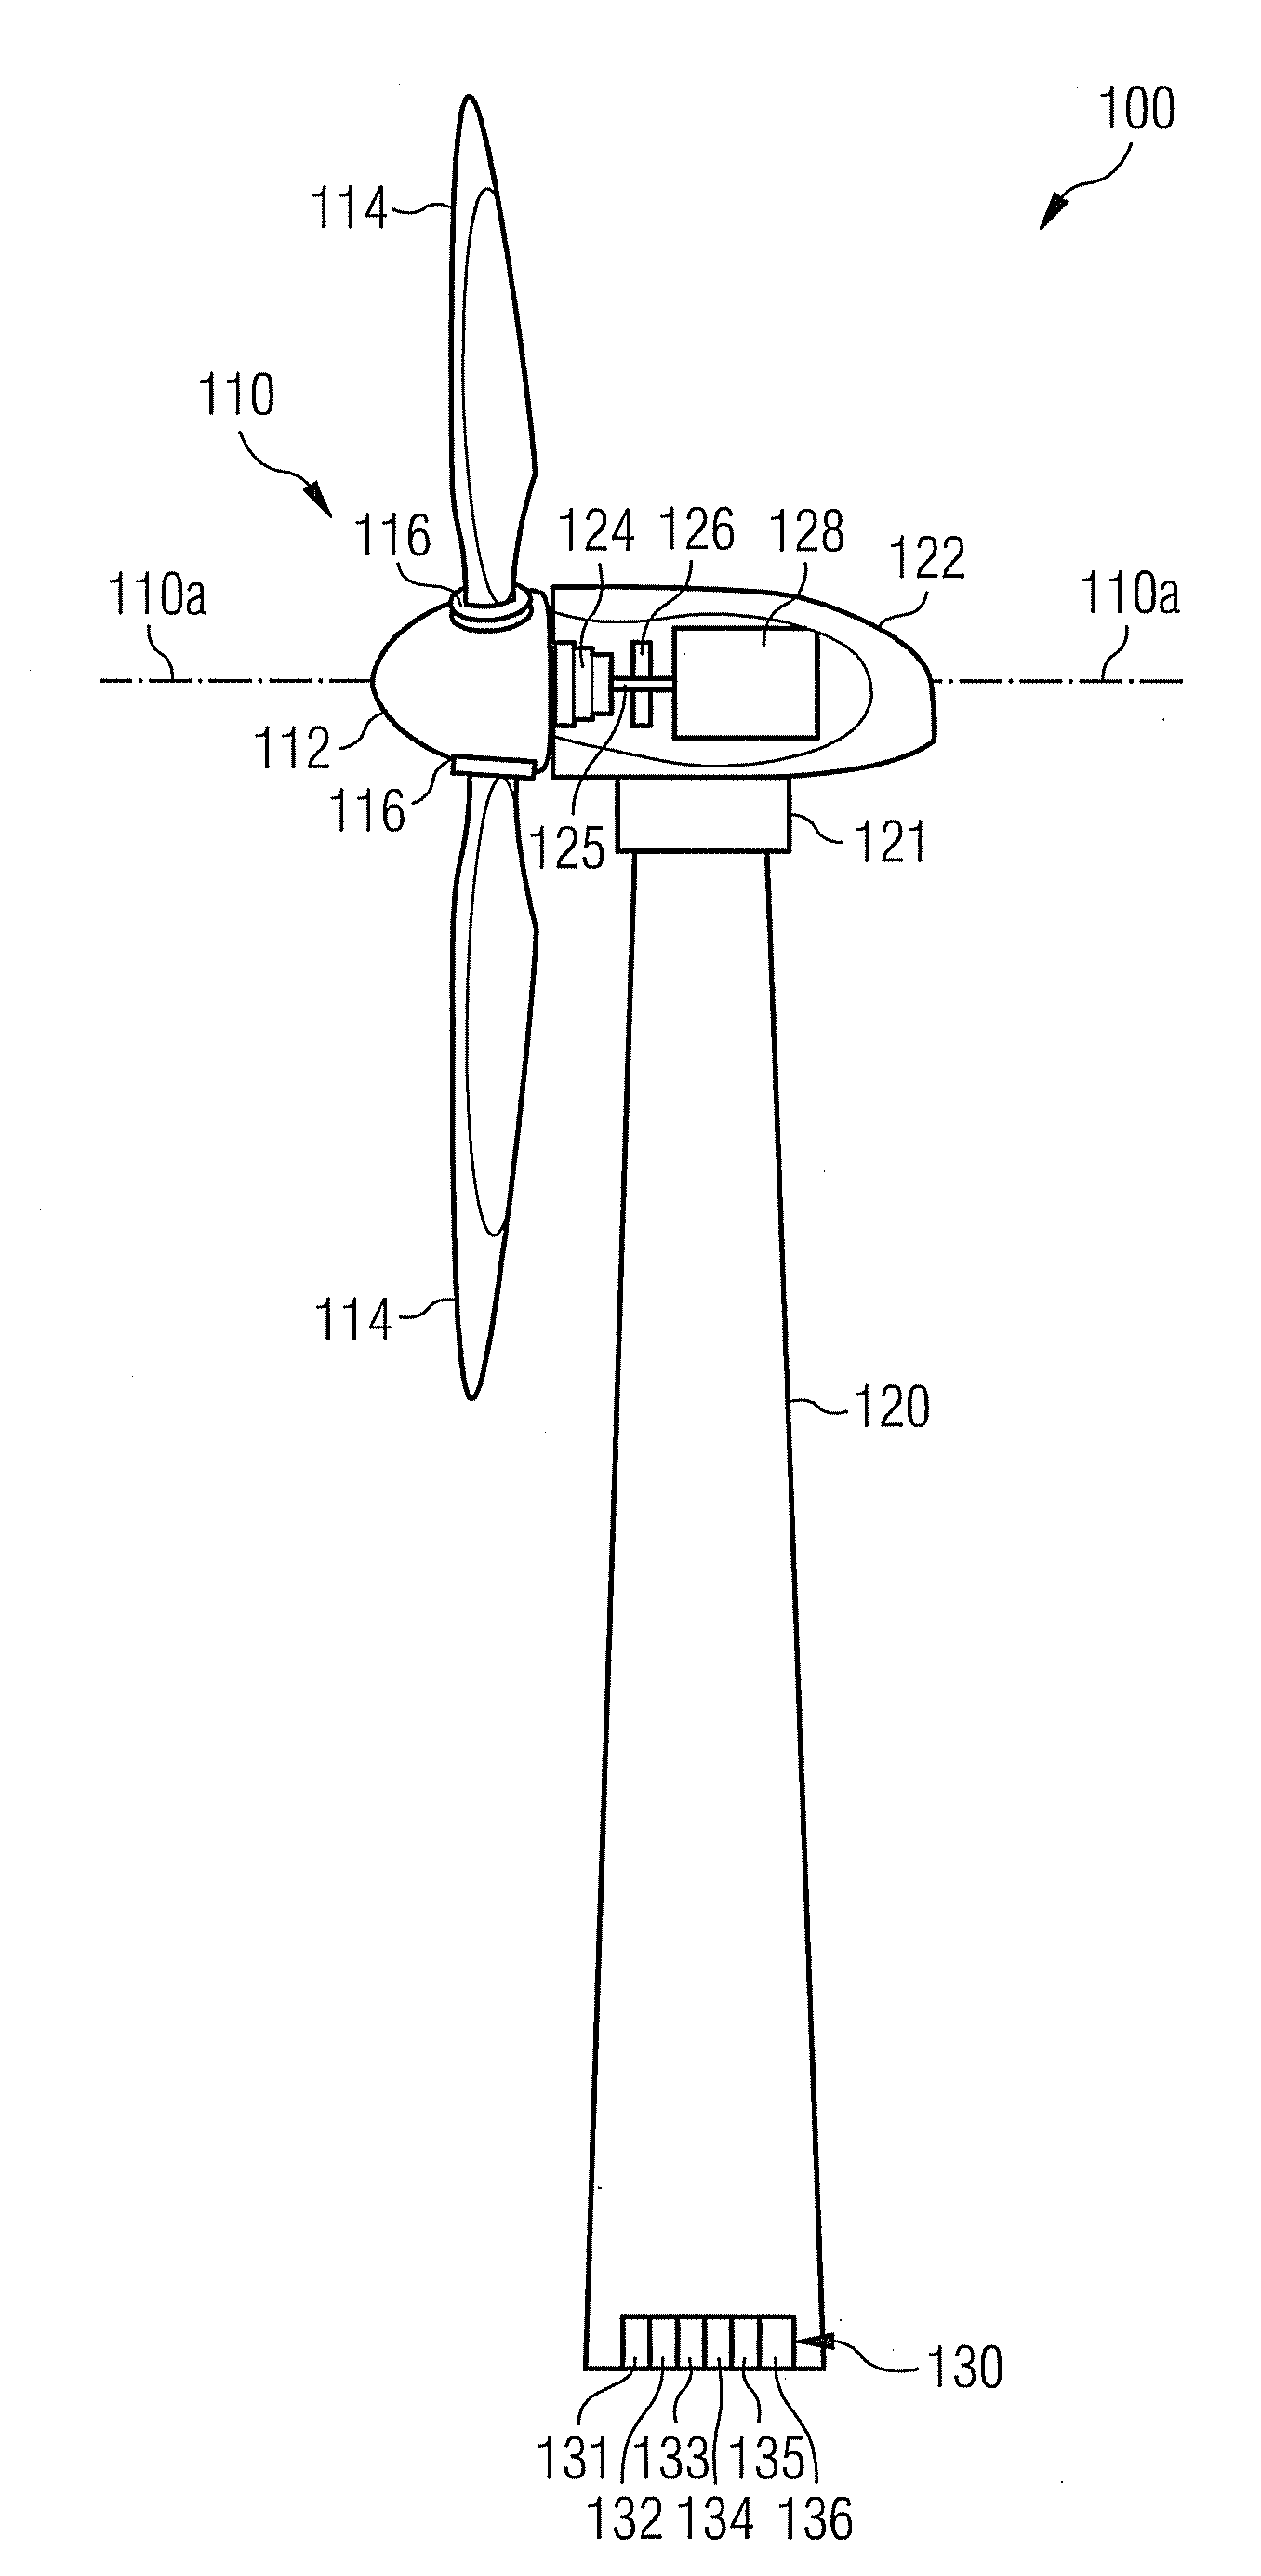 Adaptive adjustment of the blade pitch angle of a wind turbine